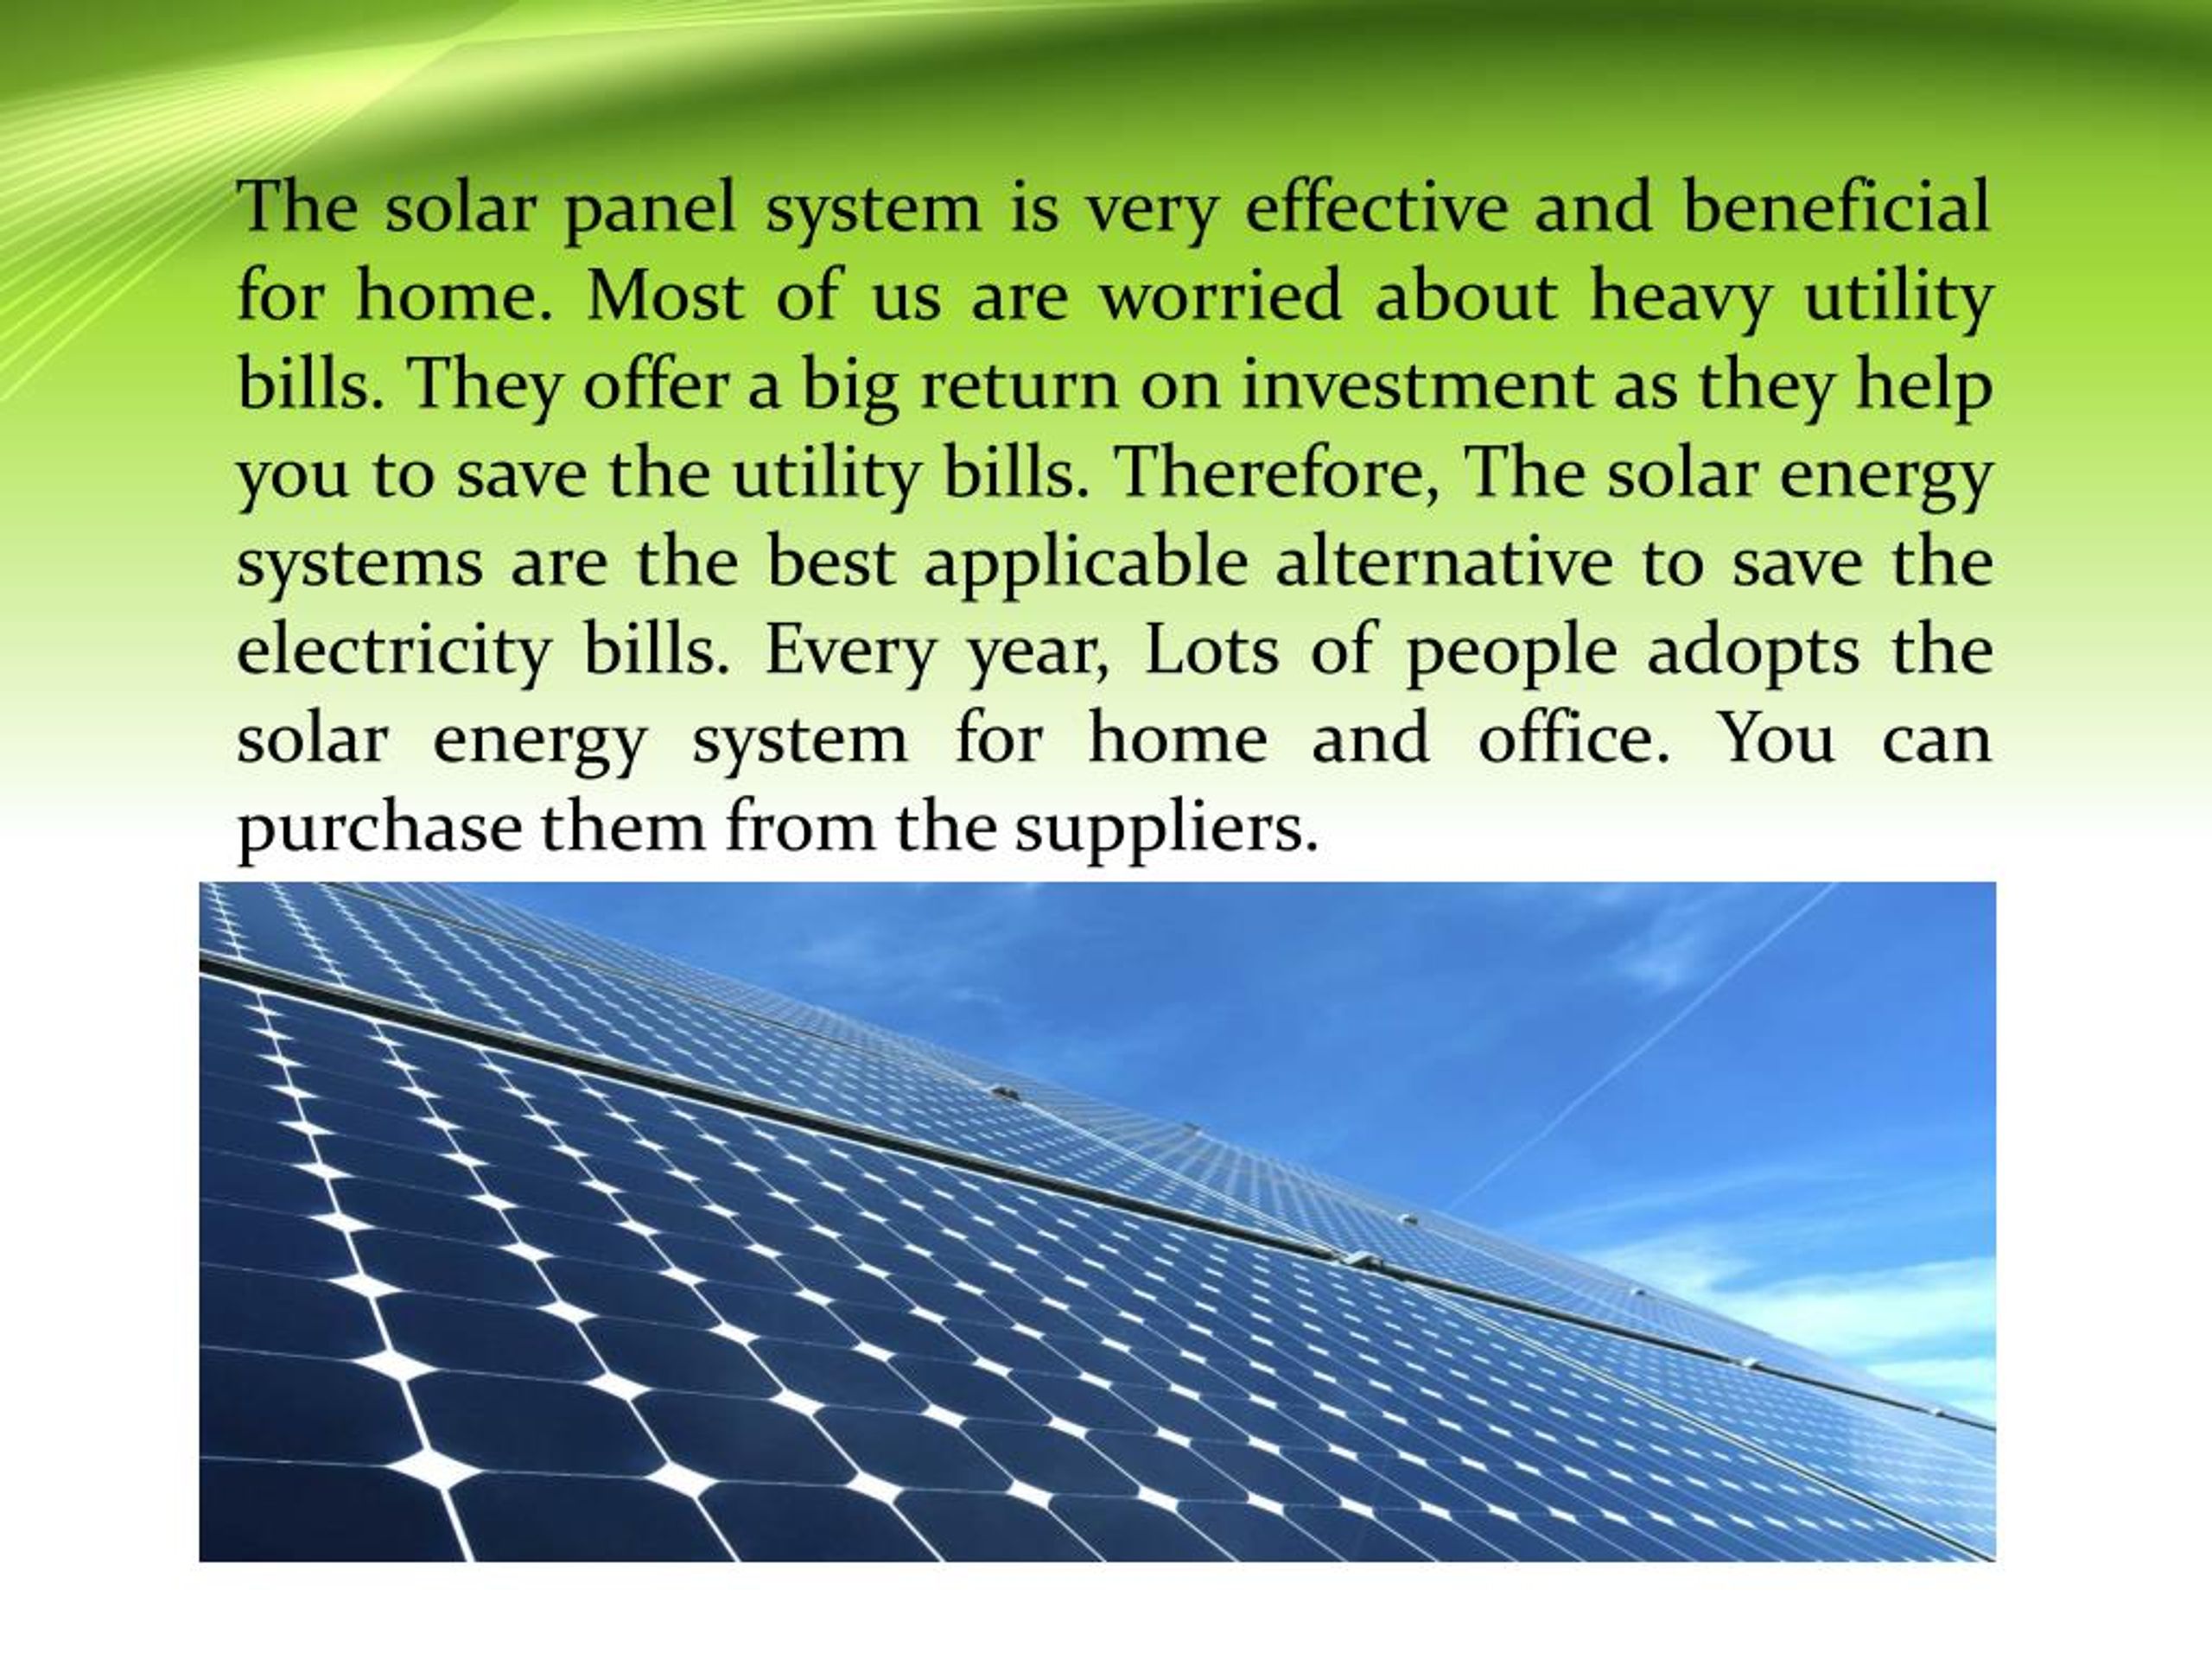 PPT - Install Beneficial Solar Panel For Your Home PowerPoint ...